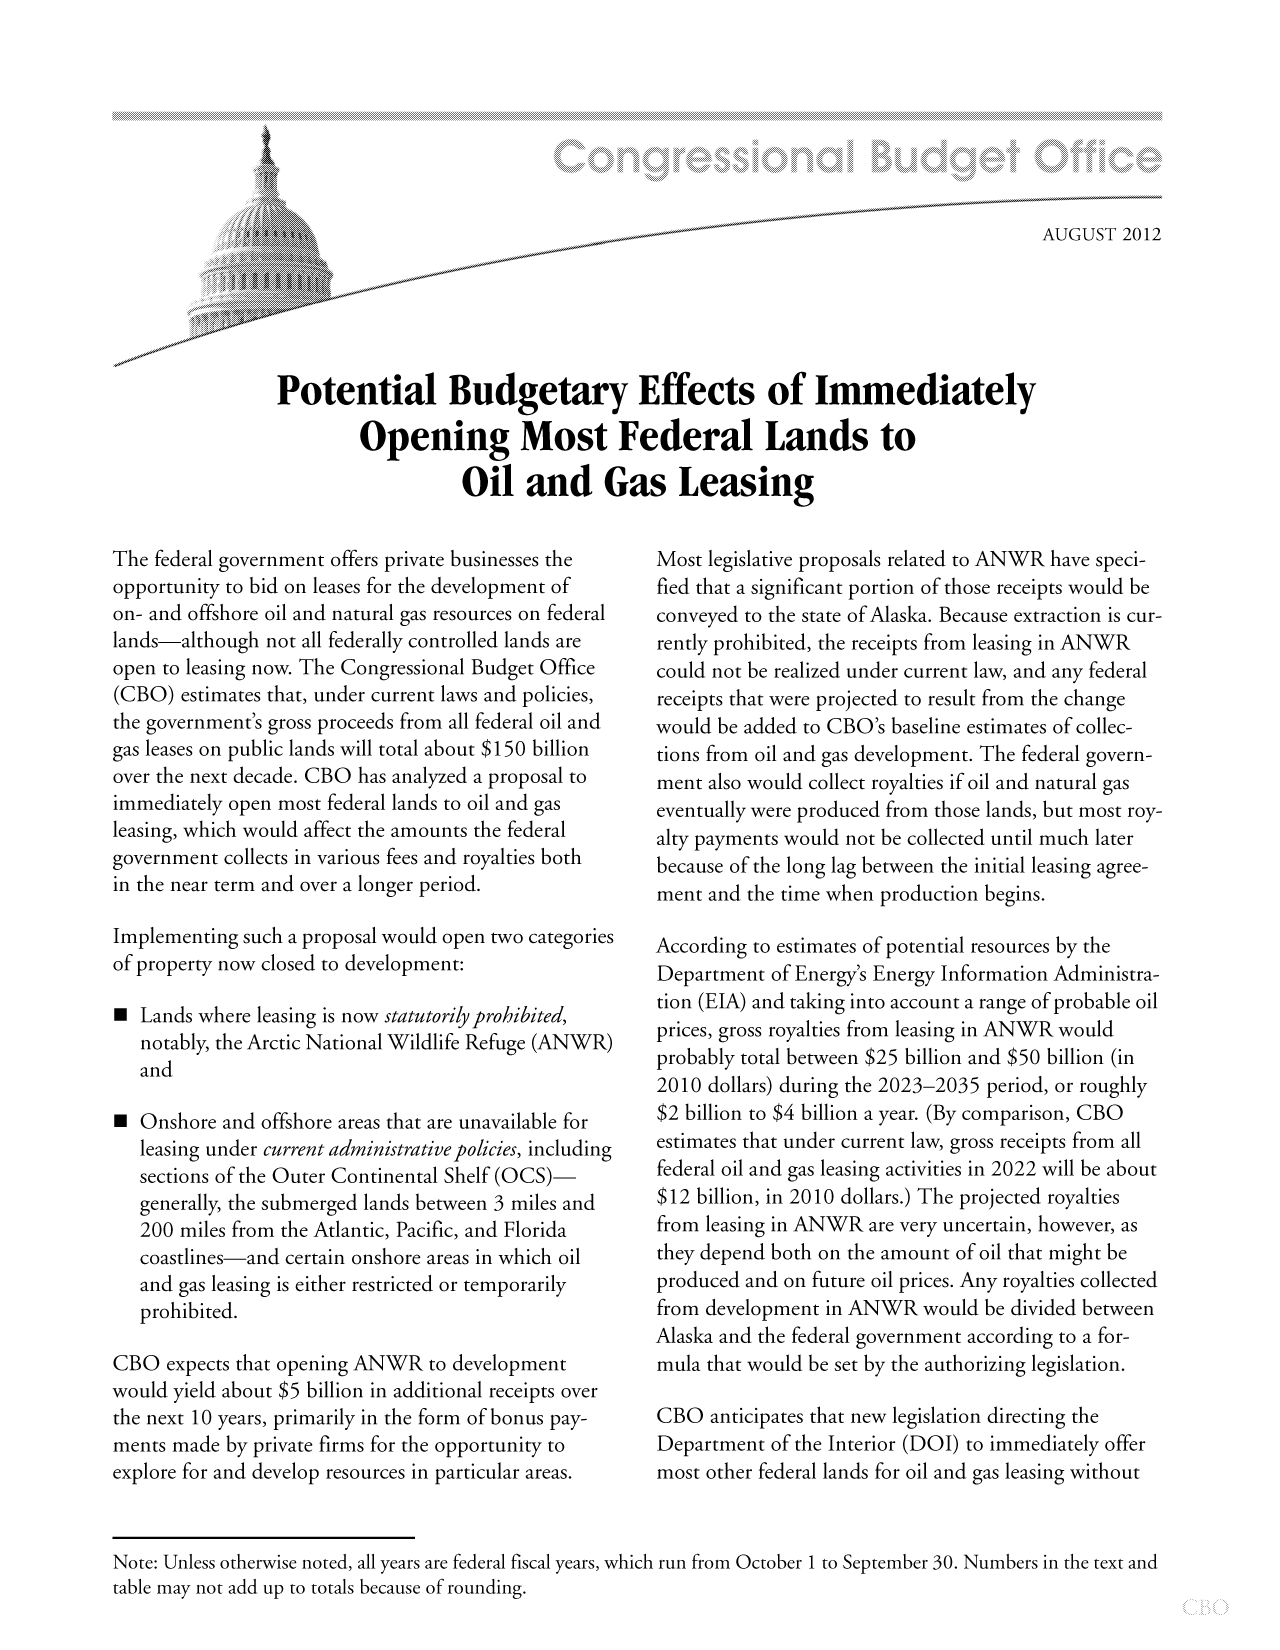 handle is hein.congrec/cbo10878 and id is 1 raw text is: AUGUST 2012
Potential Budgetary Effects of Immediately
Opening Most Federal Lands to
Oil and Gas Leasing

The federal government offers private businesses the
opportunity to bid on leases for the development of
on- and offshore oil and natural gas resources on federal
lands-although not all federally controlled lands are
open to leasing now. The Congressional Budget Office
(CBO) estimates that, under current laws and policies,
the government's gross proceeds from all federal oil and
gas leases on public lands will total about $150 billion
over the next decade. CBO has analyzed a proposal to
immediately open most federal lands to oil and gas
leasing, which would affect the amounts the federal
government collects in various fees and royalties both
in the near term and over a longer period.
Implementing such a proposal would open two categories
of property now closed to development:
 Lands where leasing is now statutorily prohibited,
notably, the Arctic National Wildlife Refuge (ANWR)
and
 Onshore and offshore areas that are unavailable for
leasing under current administrative policies, including
sections of the Outer Continental Shelf (OCS)-
generally, the submerged lands between 3 miles and
200 miles from the Atlantic, Pacific, and Florida
coastlines-and certain onshore areas in which oil
and gas leasing is either restricted or temporarily
prohibited.
CBO expects that opening ANWR to development
would yield about $5 billion in additional receipts over
the next 10 years, primarily in the form of bonus pay-
ments made by private firms for the opportunity to
explore for and develop resources in particular areas.

Most legislative proposals related to ANWR have speci-
fied that a significant portion of those receipts would be
conveyed to the state of Alaska. Because extraction is cur-
rently prohibited, the receipts from leasing in ANWR
could not be realized under current law, and any federal
receipts that were projected to result from the change
would be added to CBO's baseline estimates of collec-
tions from oil and gas development. The federal govern-
ment also would collect royalties if oil and natural gas
eventually were produced from those lands, but most roy-
alty payments would not be collected until much later
because of the long lag between the initial leasing agree-
ment and the time when production begins.
According to estimates of potential resources by the
Department of Energy's Energy Information Administra-
tion (EIA) and taking into account a range of probable oil
prices, gross royalties from leasing in ANWR would
probably total between $25 billion and $50 billion (in
2010 dollars) during the 2023-2035 period, or roughly
$2 billion to $4 billion a year. (By comparison, CBO
estimates that under current law, gross receipts from all
federal oil and gas leasing activities in 2022 will be about
$12 billion, in 2010 dollars.) The projected royalties
from leasing in ANWR are very uncertain, however, as
they depend both on the amount of oil that might be
produced and on future oil prices. Any royalties collected
from development in ANWR would be divided between
Alaska and the federal government according to a for-
mula that would be set by the authorizing legislation.
CBO anticipates that new legislation directing the
Department of the Interior (DOI) to immediately offer
most other federal lands for oil and gas leasing without

Note: Unless otherwise noted, all years are federal fiscal years, which run from October 1 to September 30. Numbers in the text and
table may not add up to totals because of rounding.


